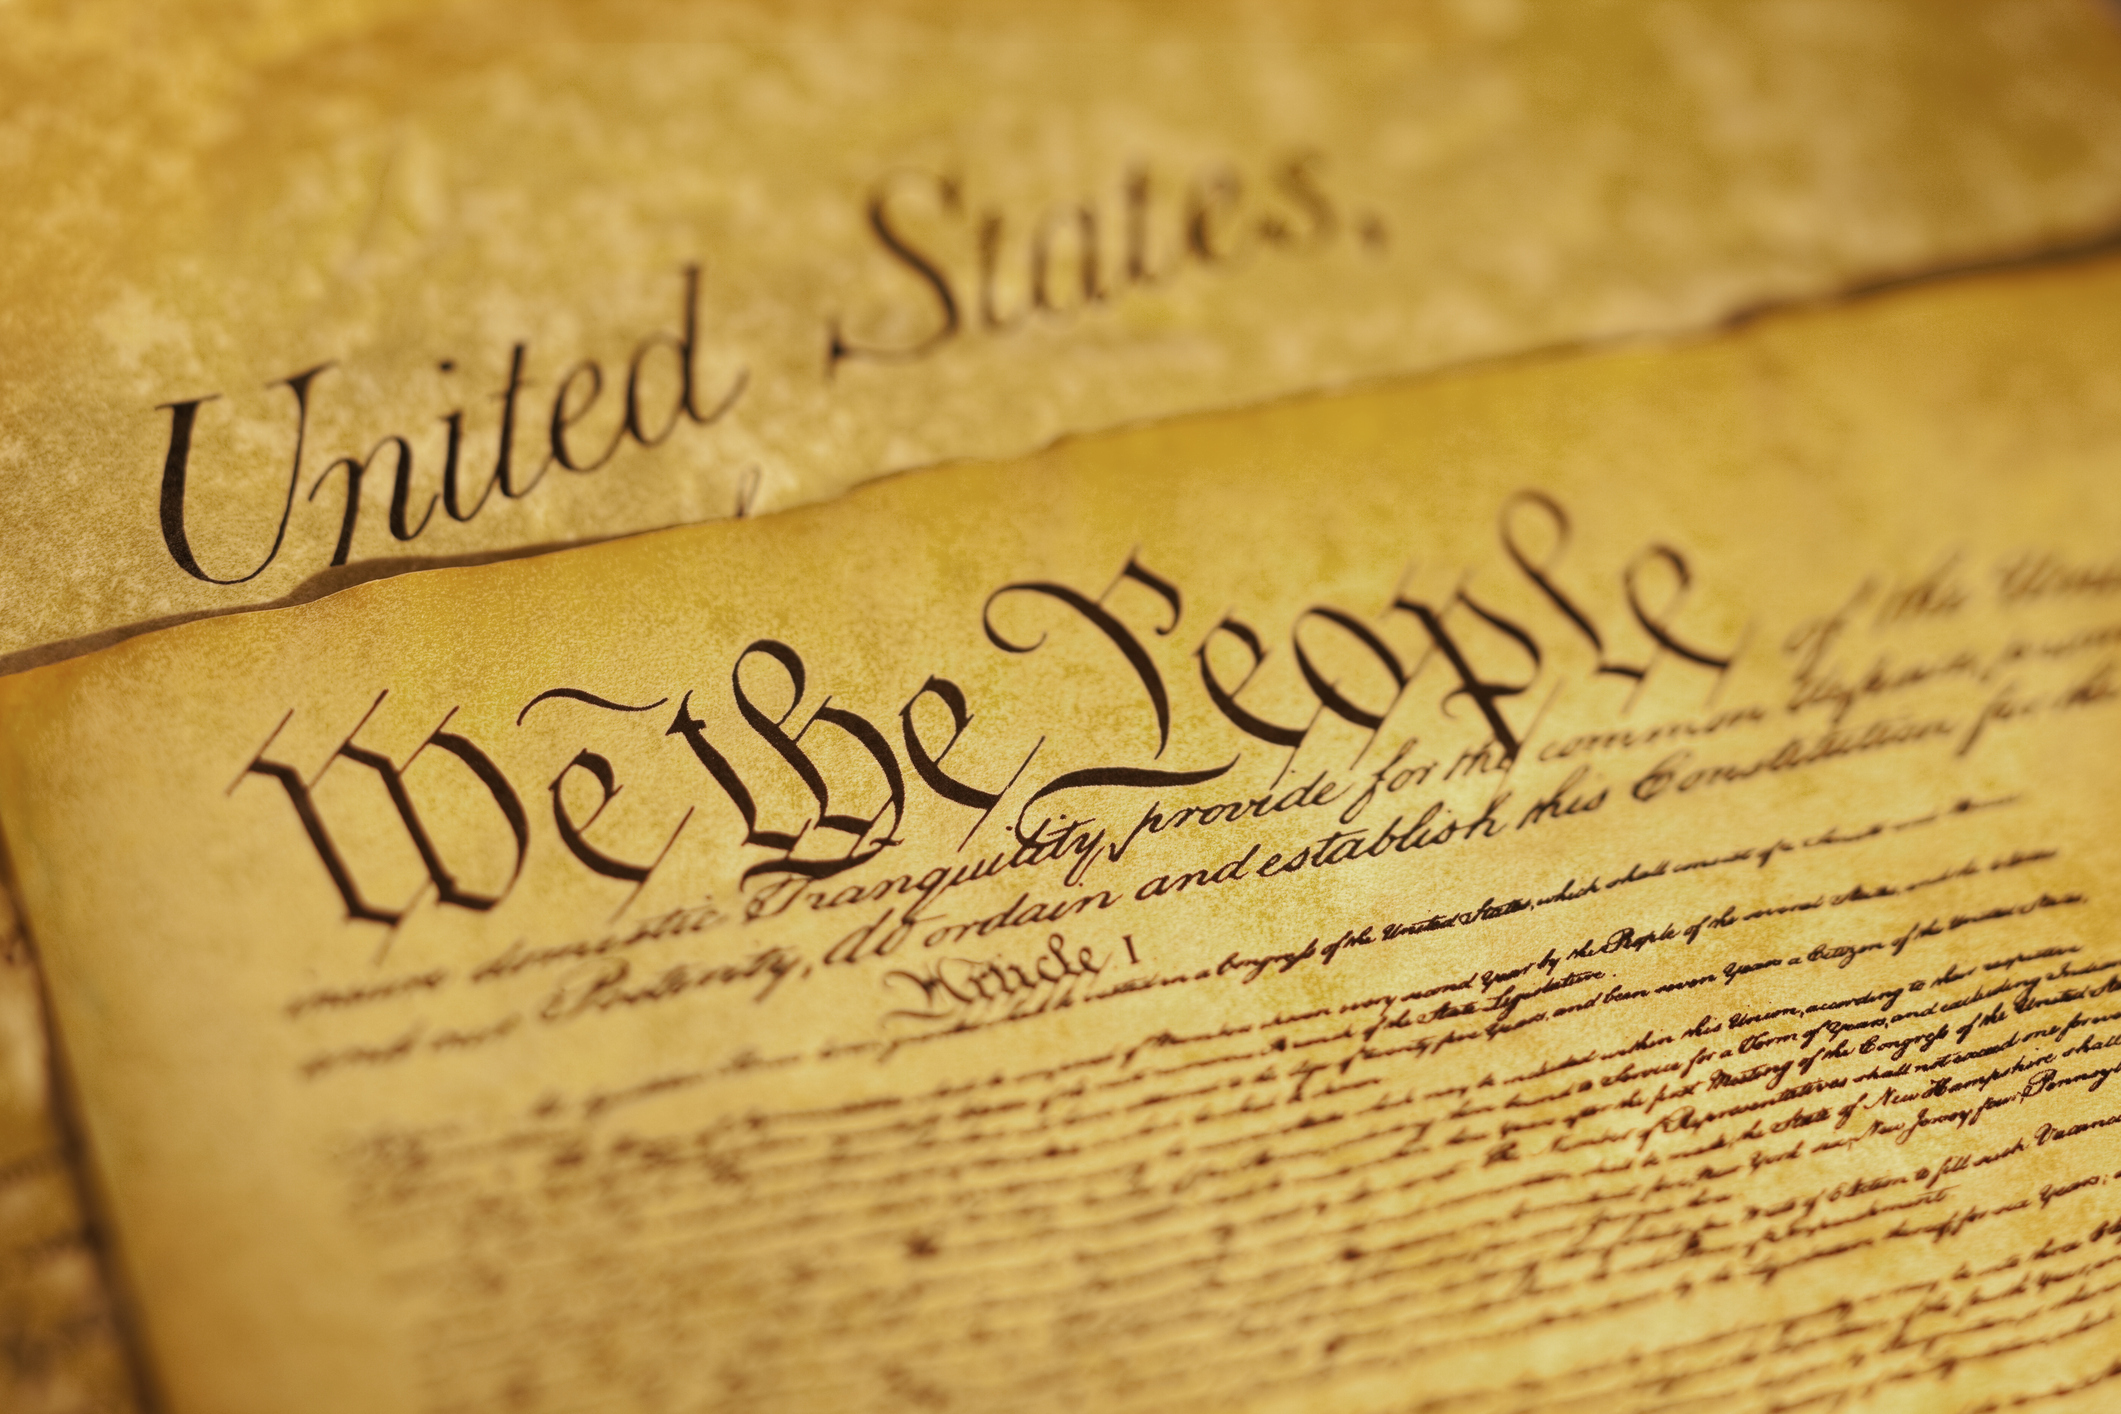 We the People are the opening words of the preamble to the Constitution of the USA. This image has a shallow depth of field to emphasize the opening phrase. The document underneath is a copy of the Bill of Rights.